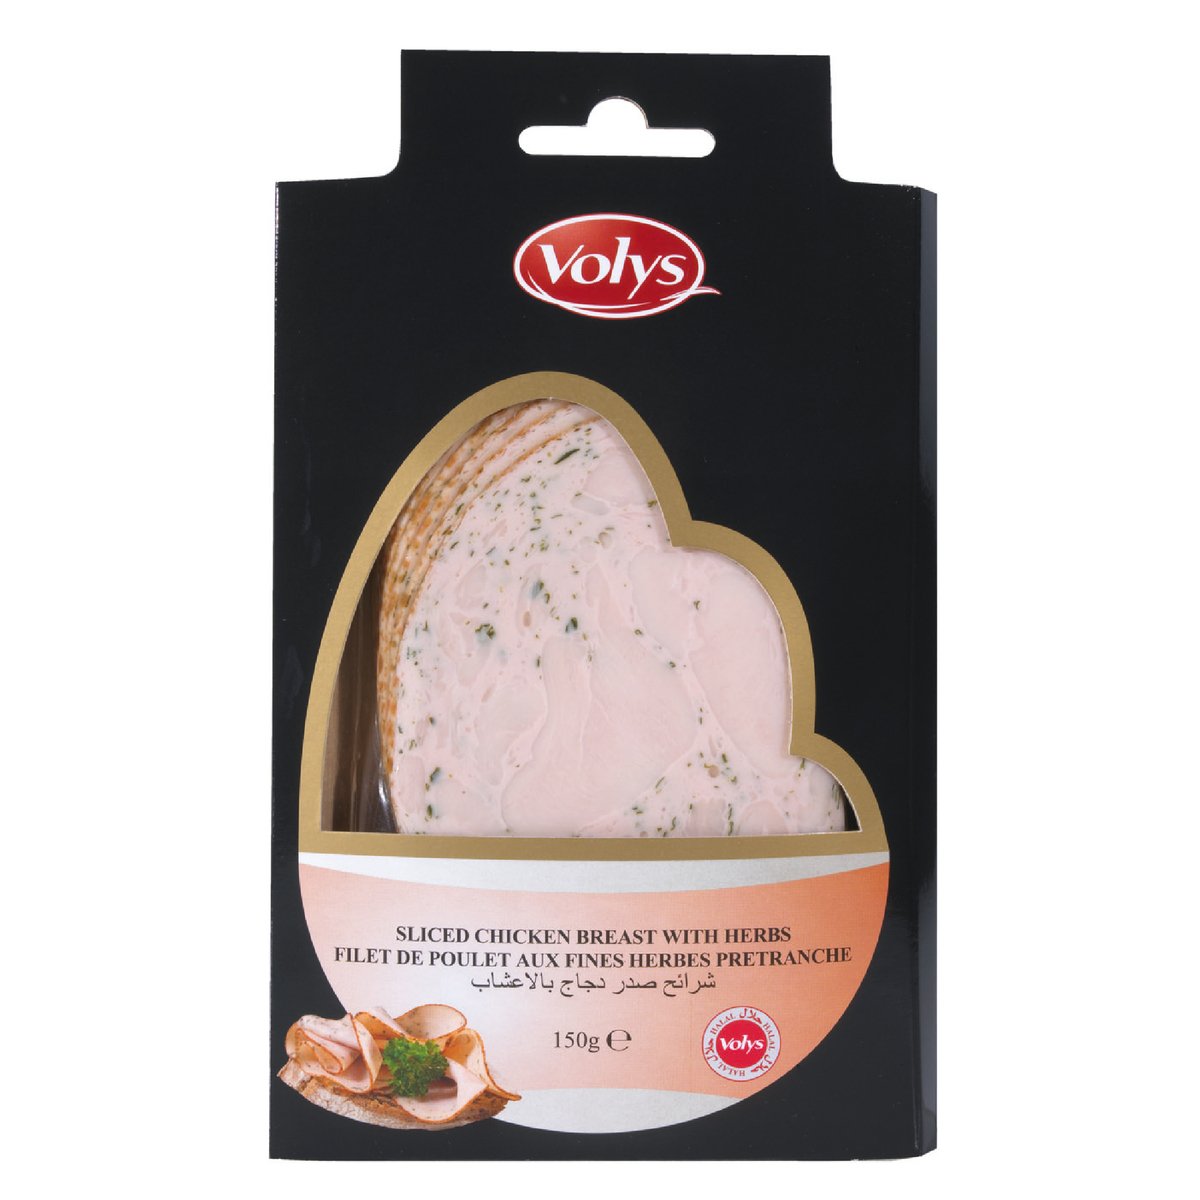 Volys Sliced Chicken Breast With Herbs 150g